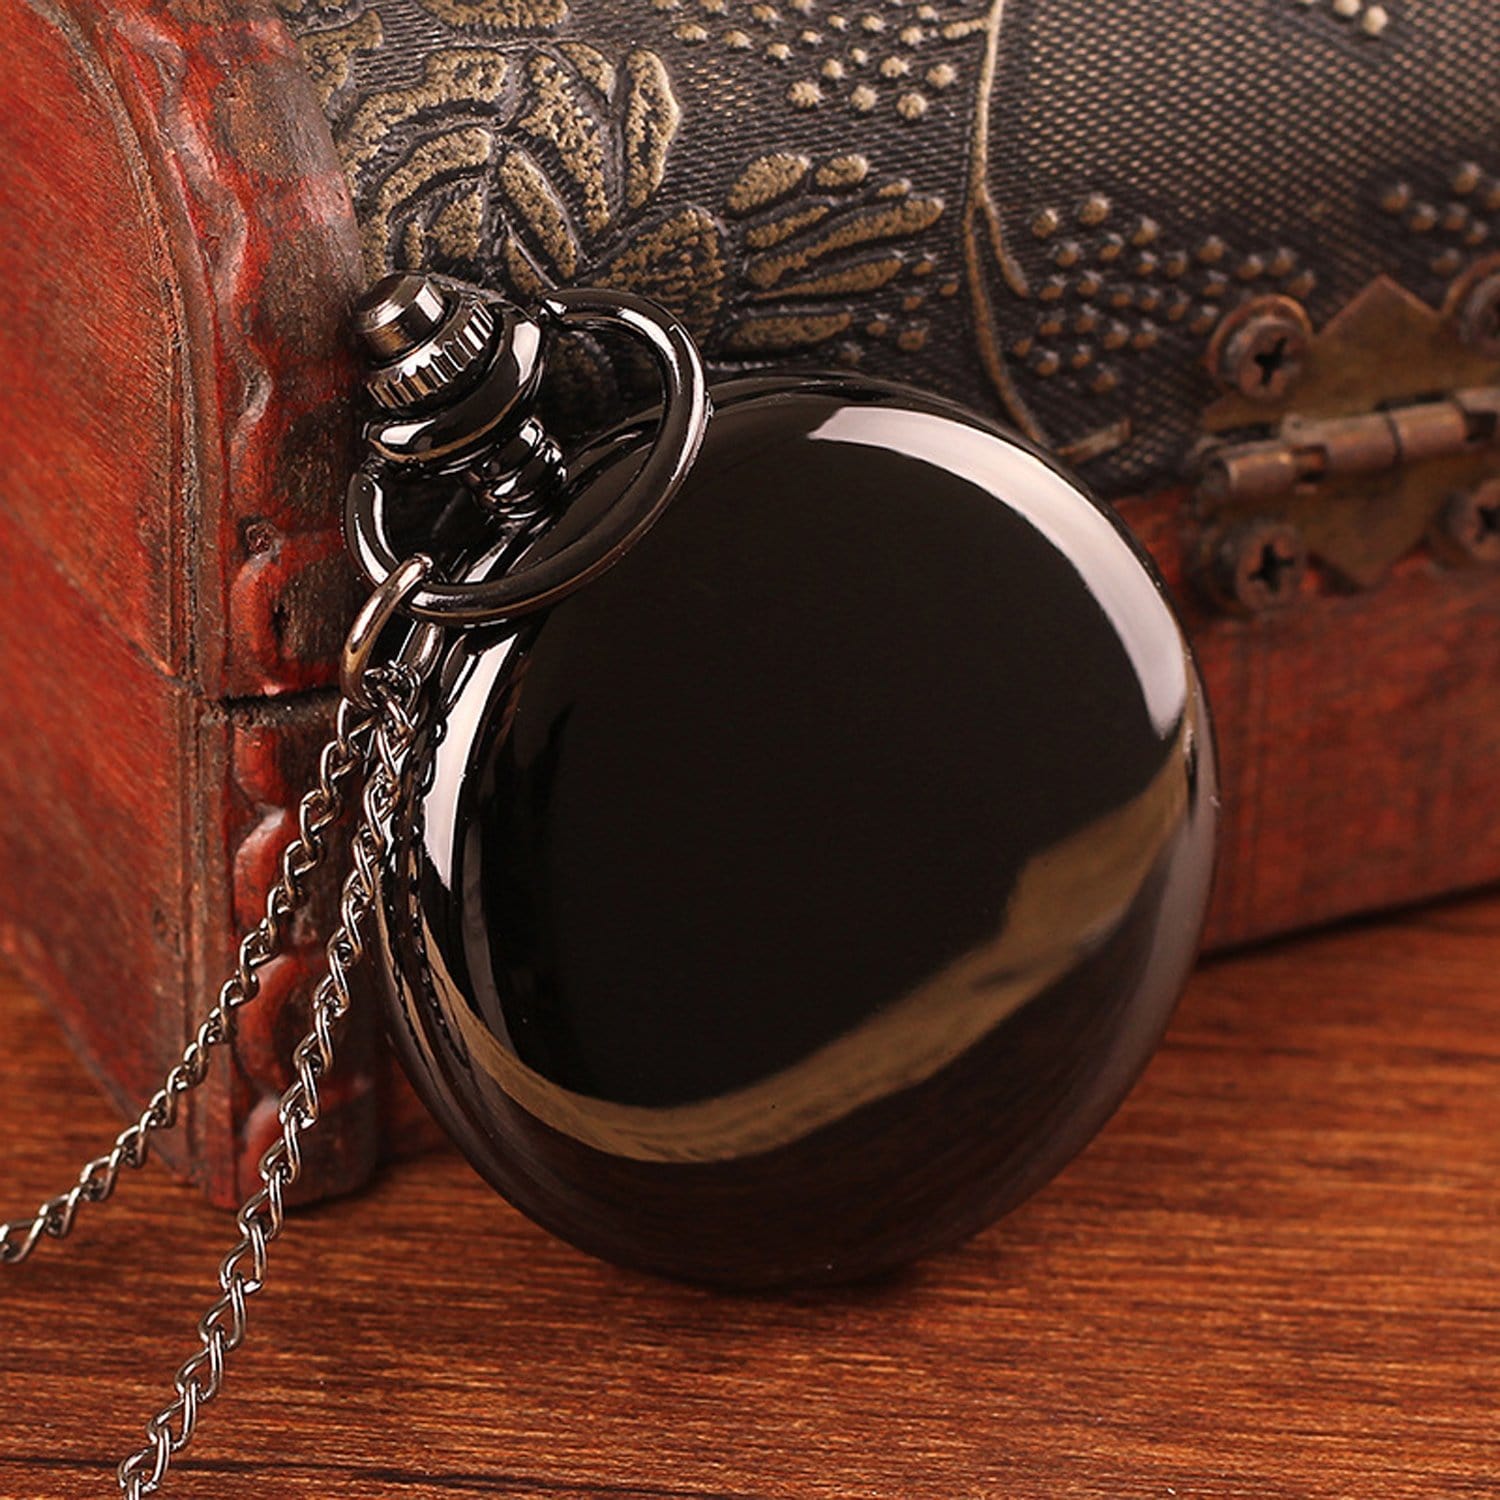 Pocket Watches To My Boyfriend - When I Tell You I Love You Pocket Watch GiveMe-Gifts